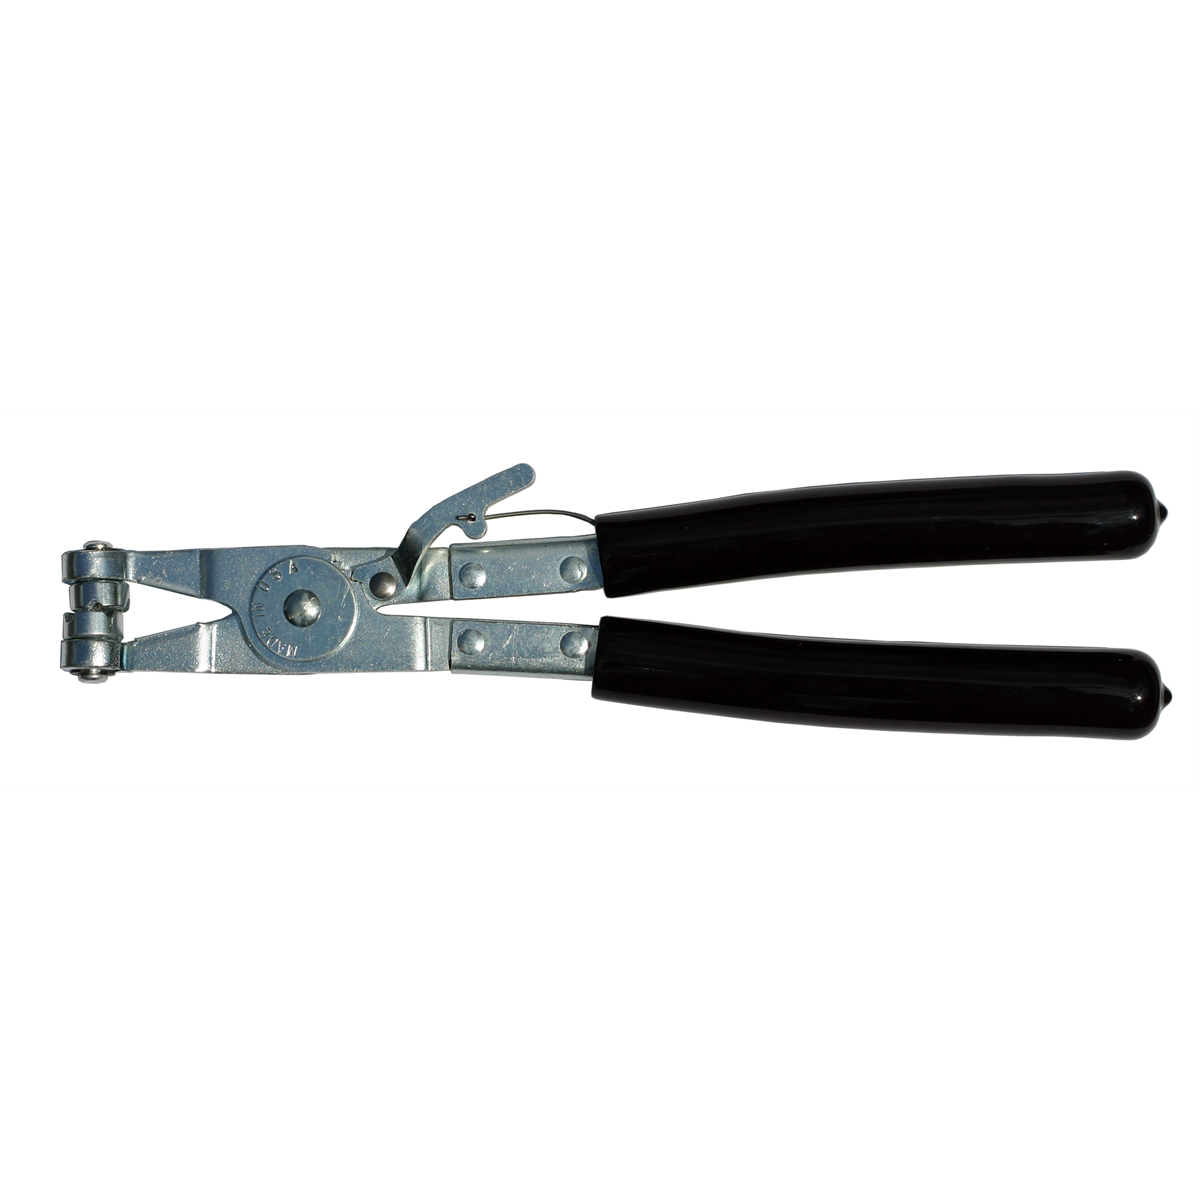 Hose Clamp Pliers - Single Wire Clamps